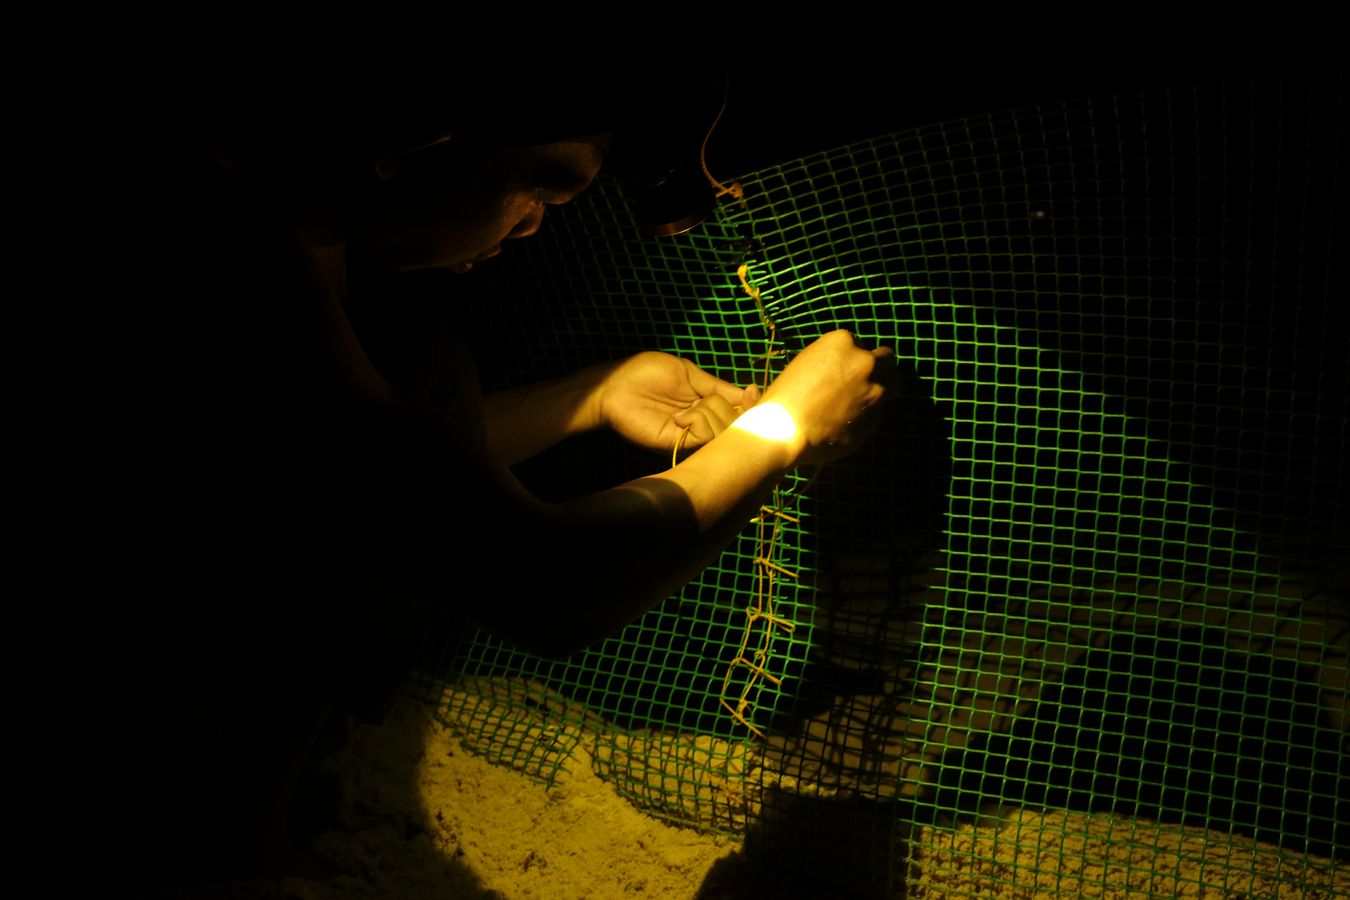 At night, a ranger repairs the net of the sea turtle hatchery.